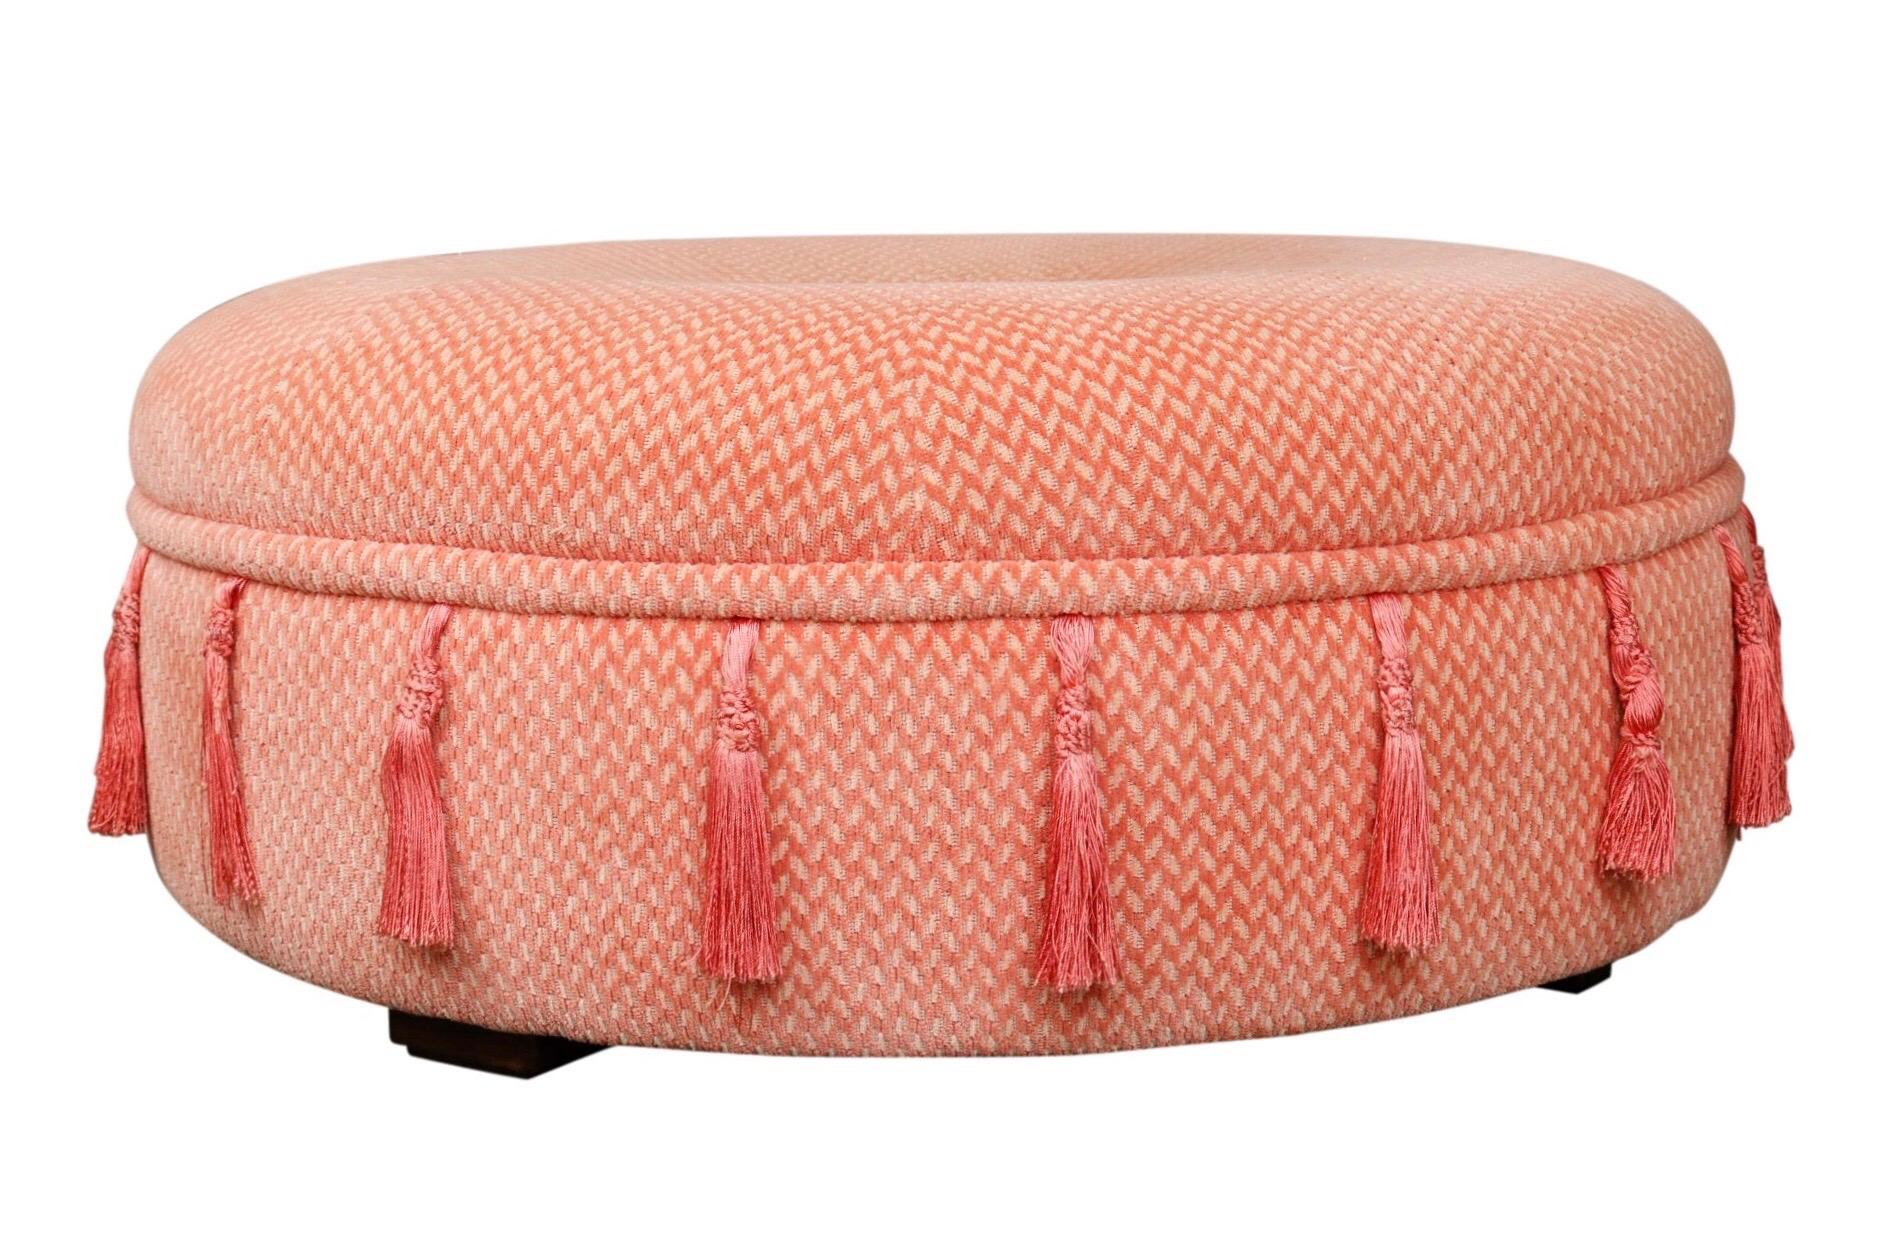 A large round coffee table ottoman. Upholstered in a salmon pink basket weave with a button at the center and trimmed with tassels around the circumference. Stands on four square wooden legs.